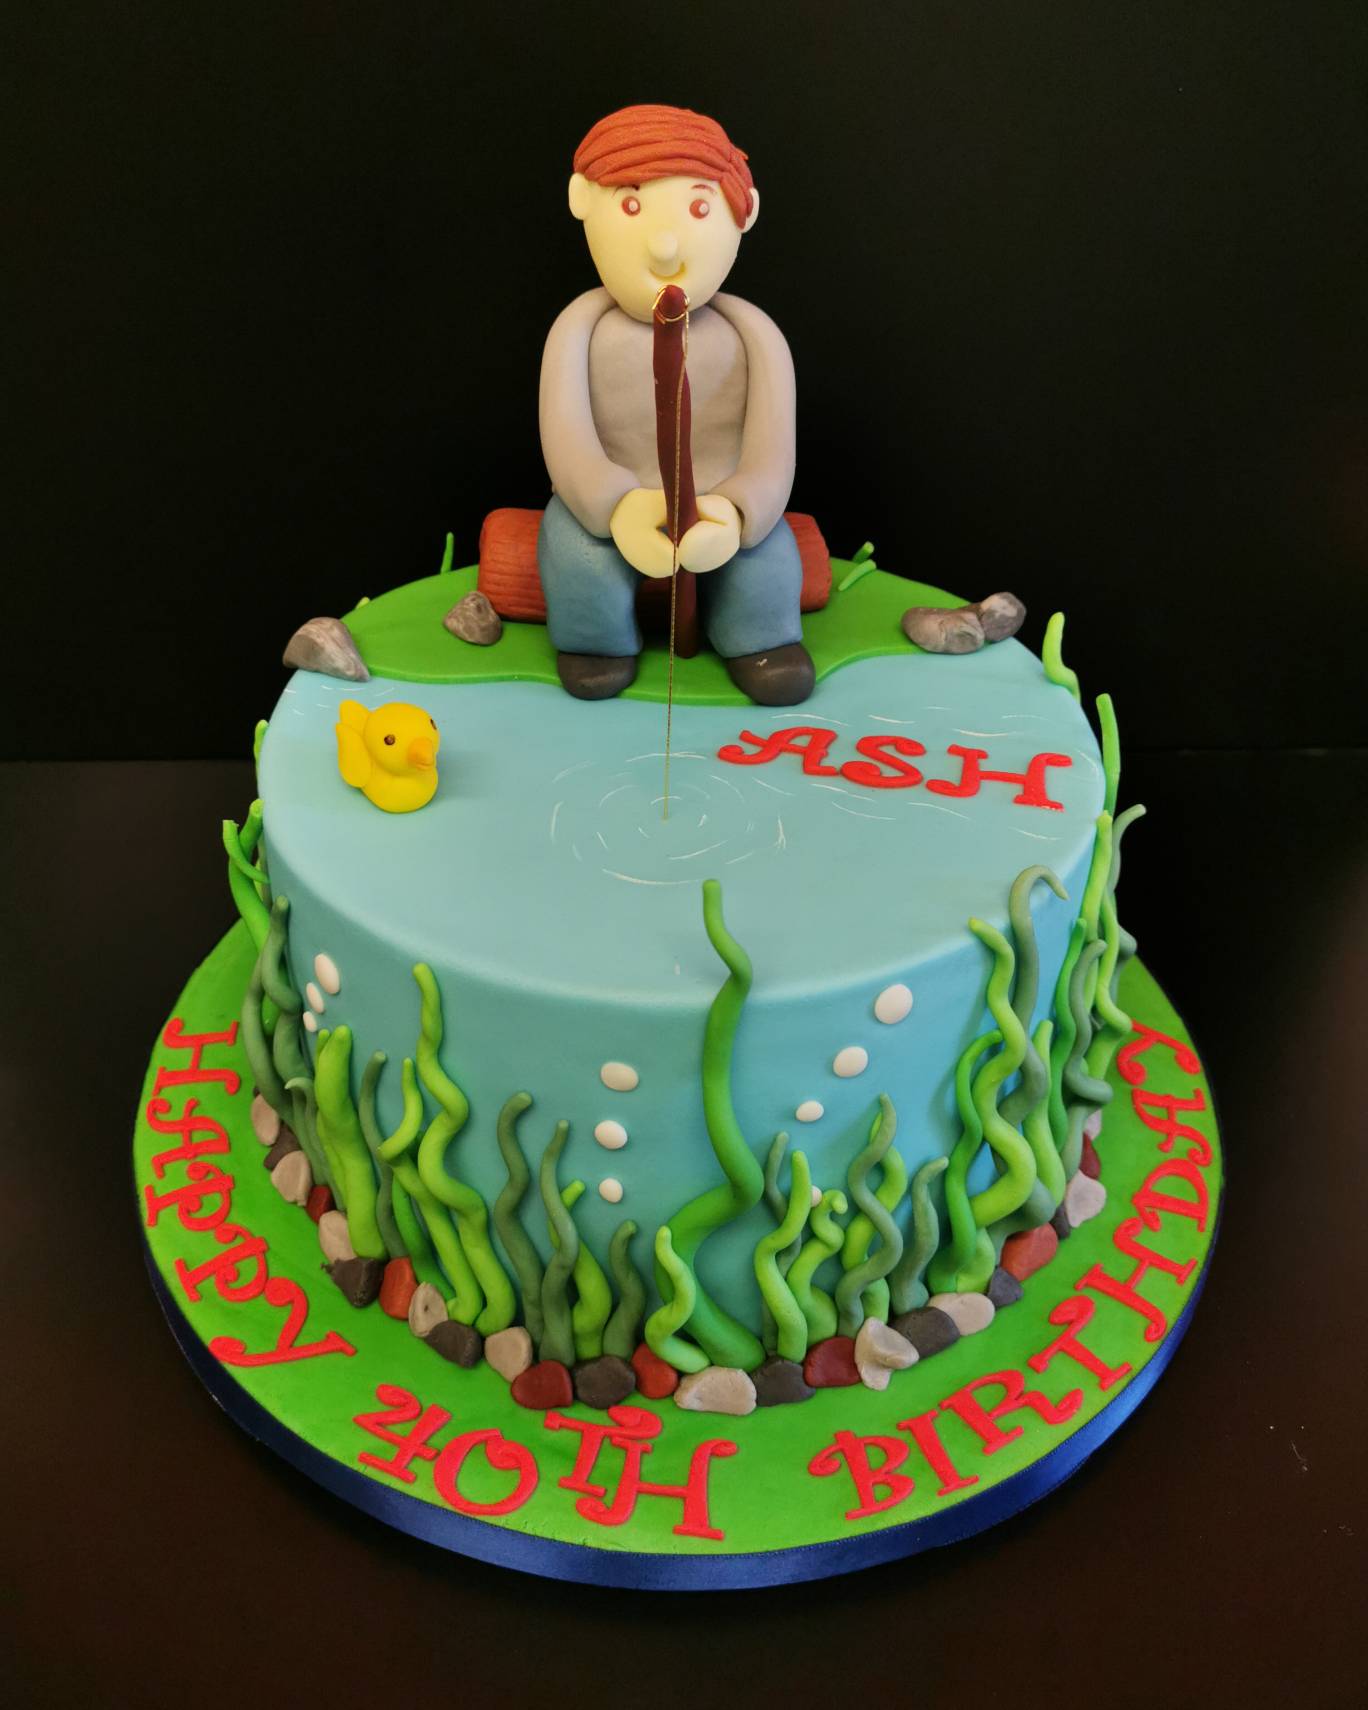 Homemade Cakes on X: Love this fishing themed cake! Relatively